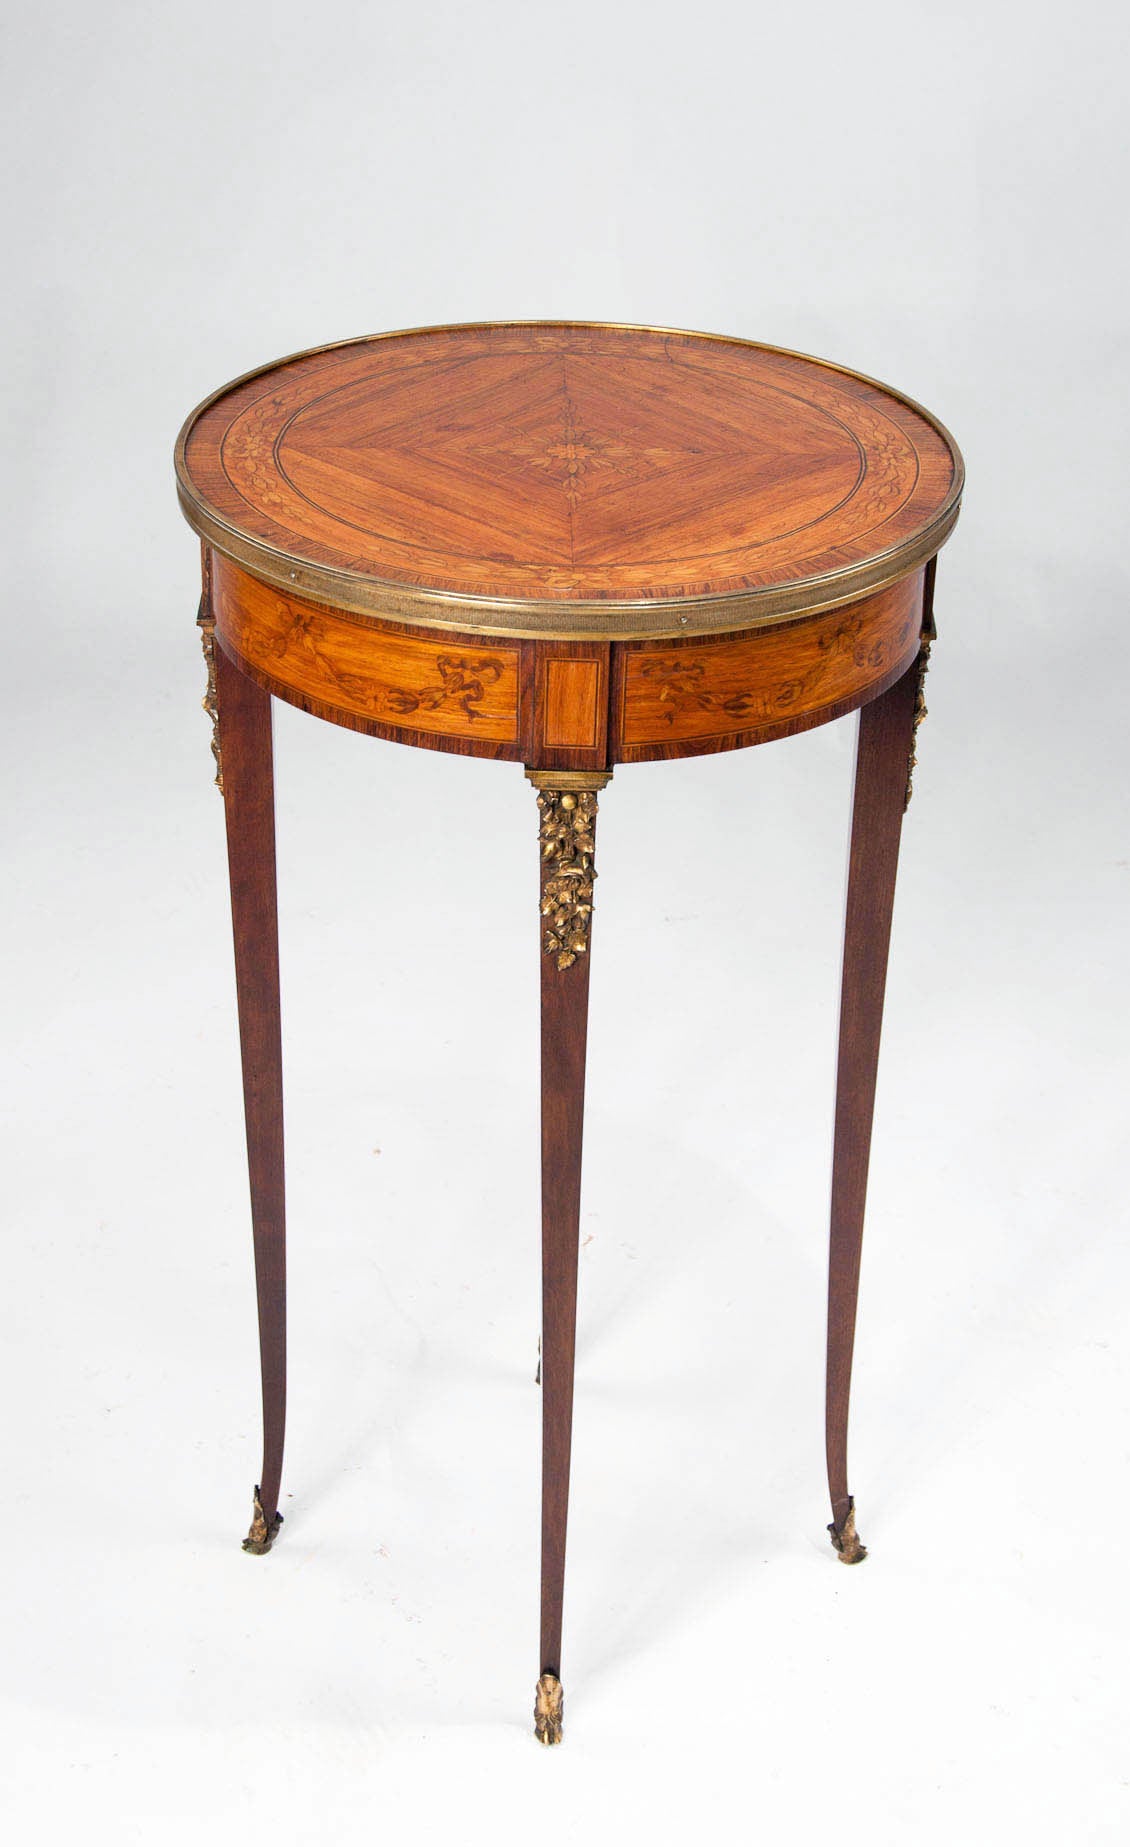 A very fine French inlaid occasional table with gilt mounts and banding. This superb quality occasional table dating to circa 1900's has round kingwood floral inlaid top with rosewood crossbanded board and gilt reeded edge band, the satinwood frieze